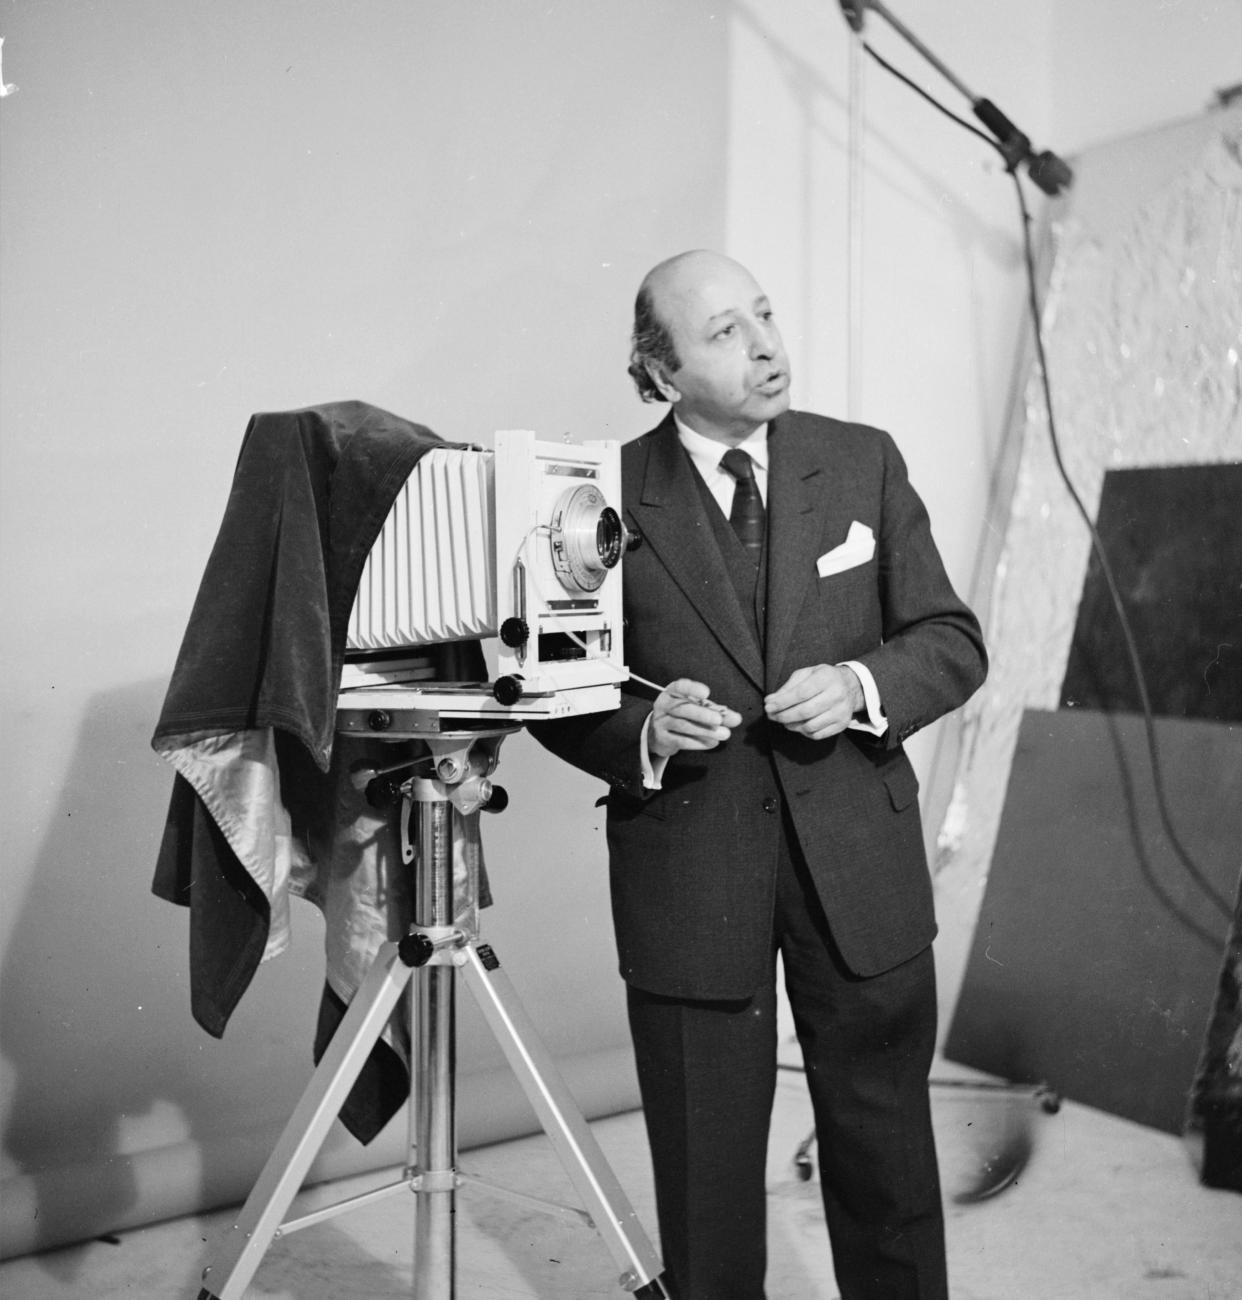 Yousuf Karsh stands next to large camera on a tripod.